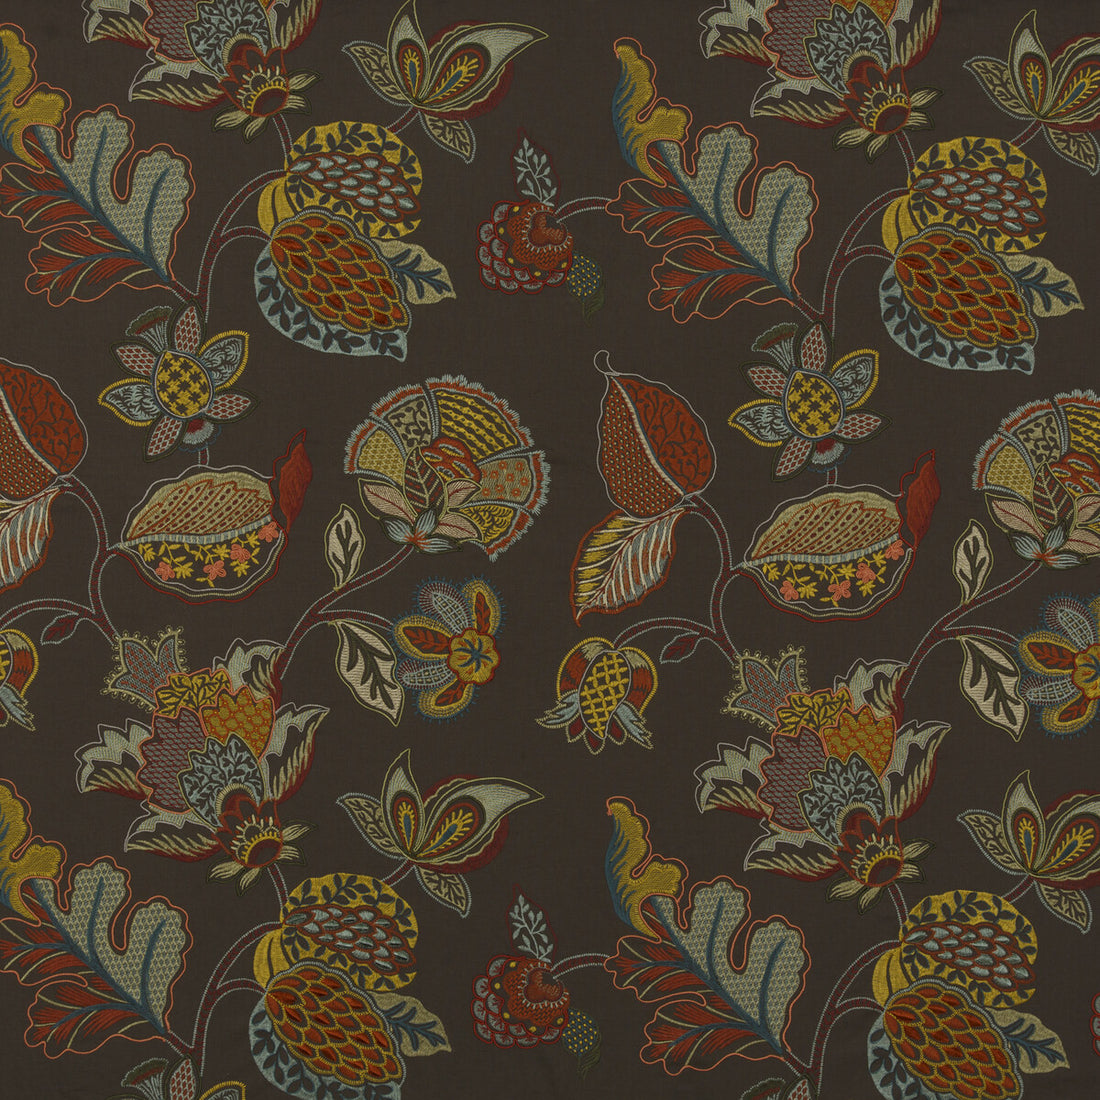 Audley fabric in amber/bronze color - pattern BF10659.2.0 - by G P &amp; J Baker in the Historic Royal Palaces collection